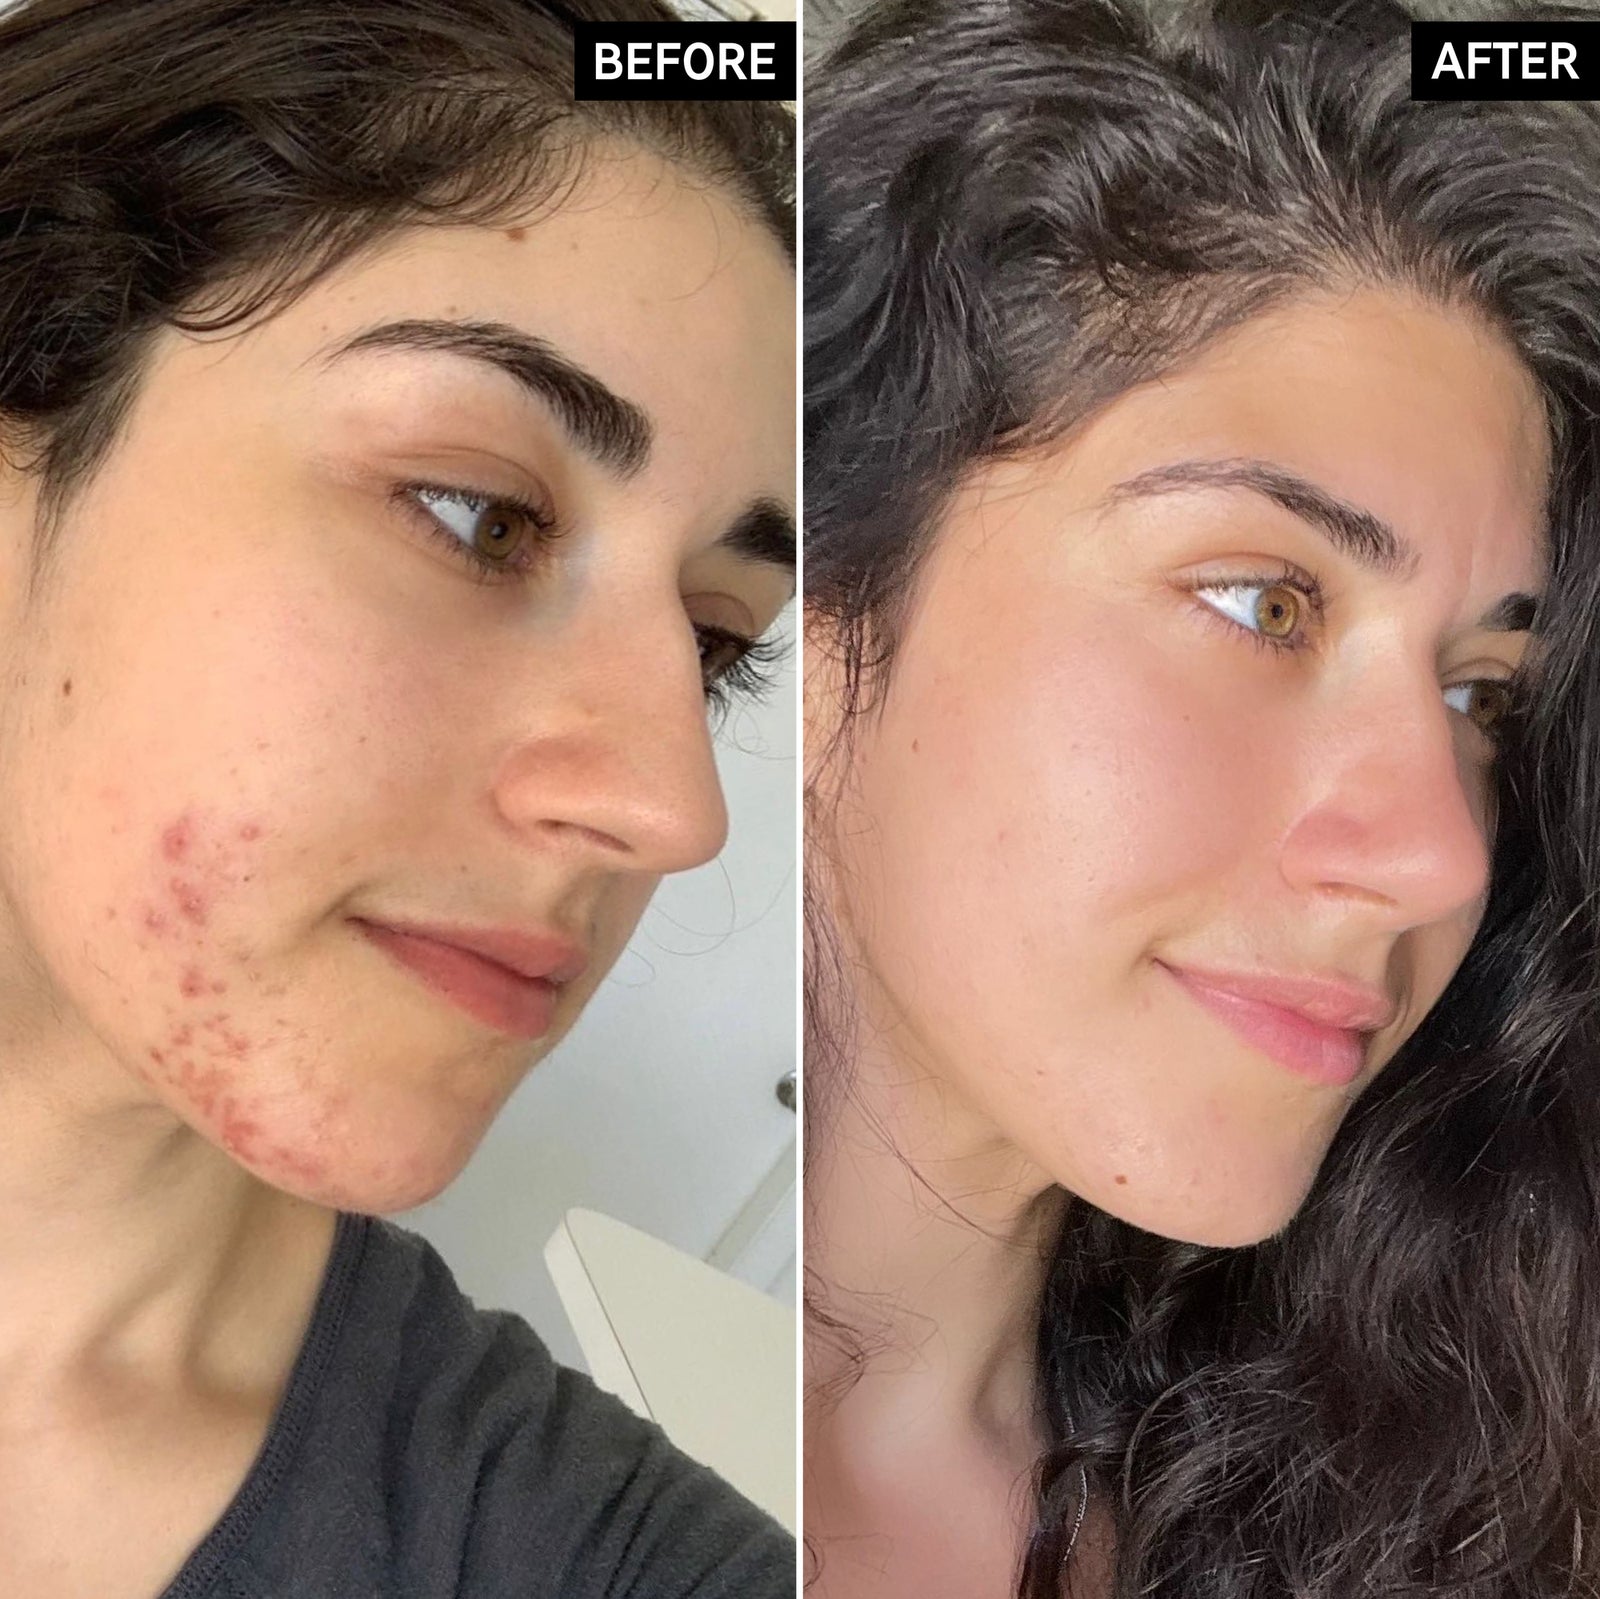 Before & After of customer using Succinic Acid Treatment in the Clearer Skin Routine